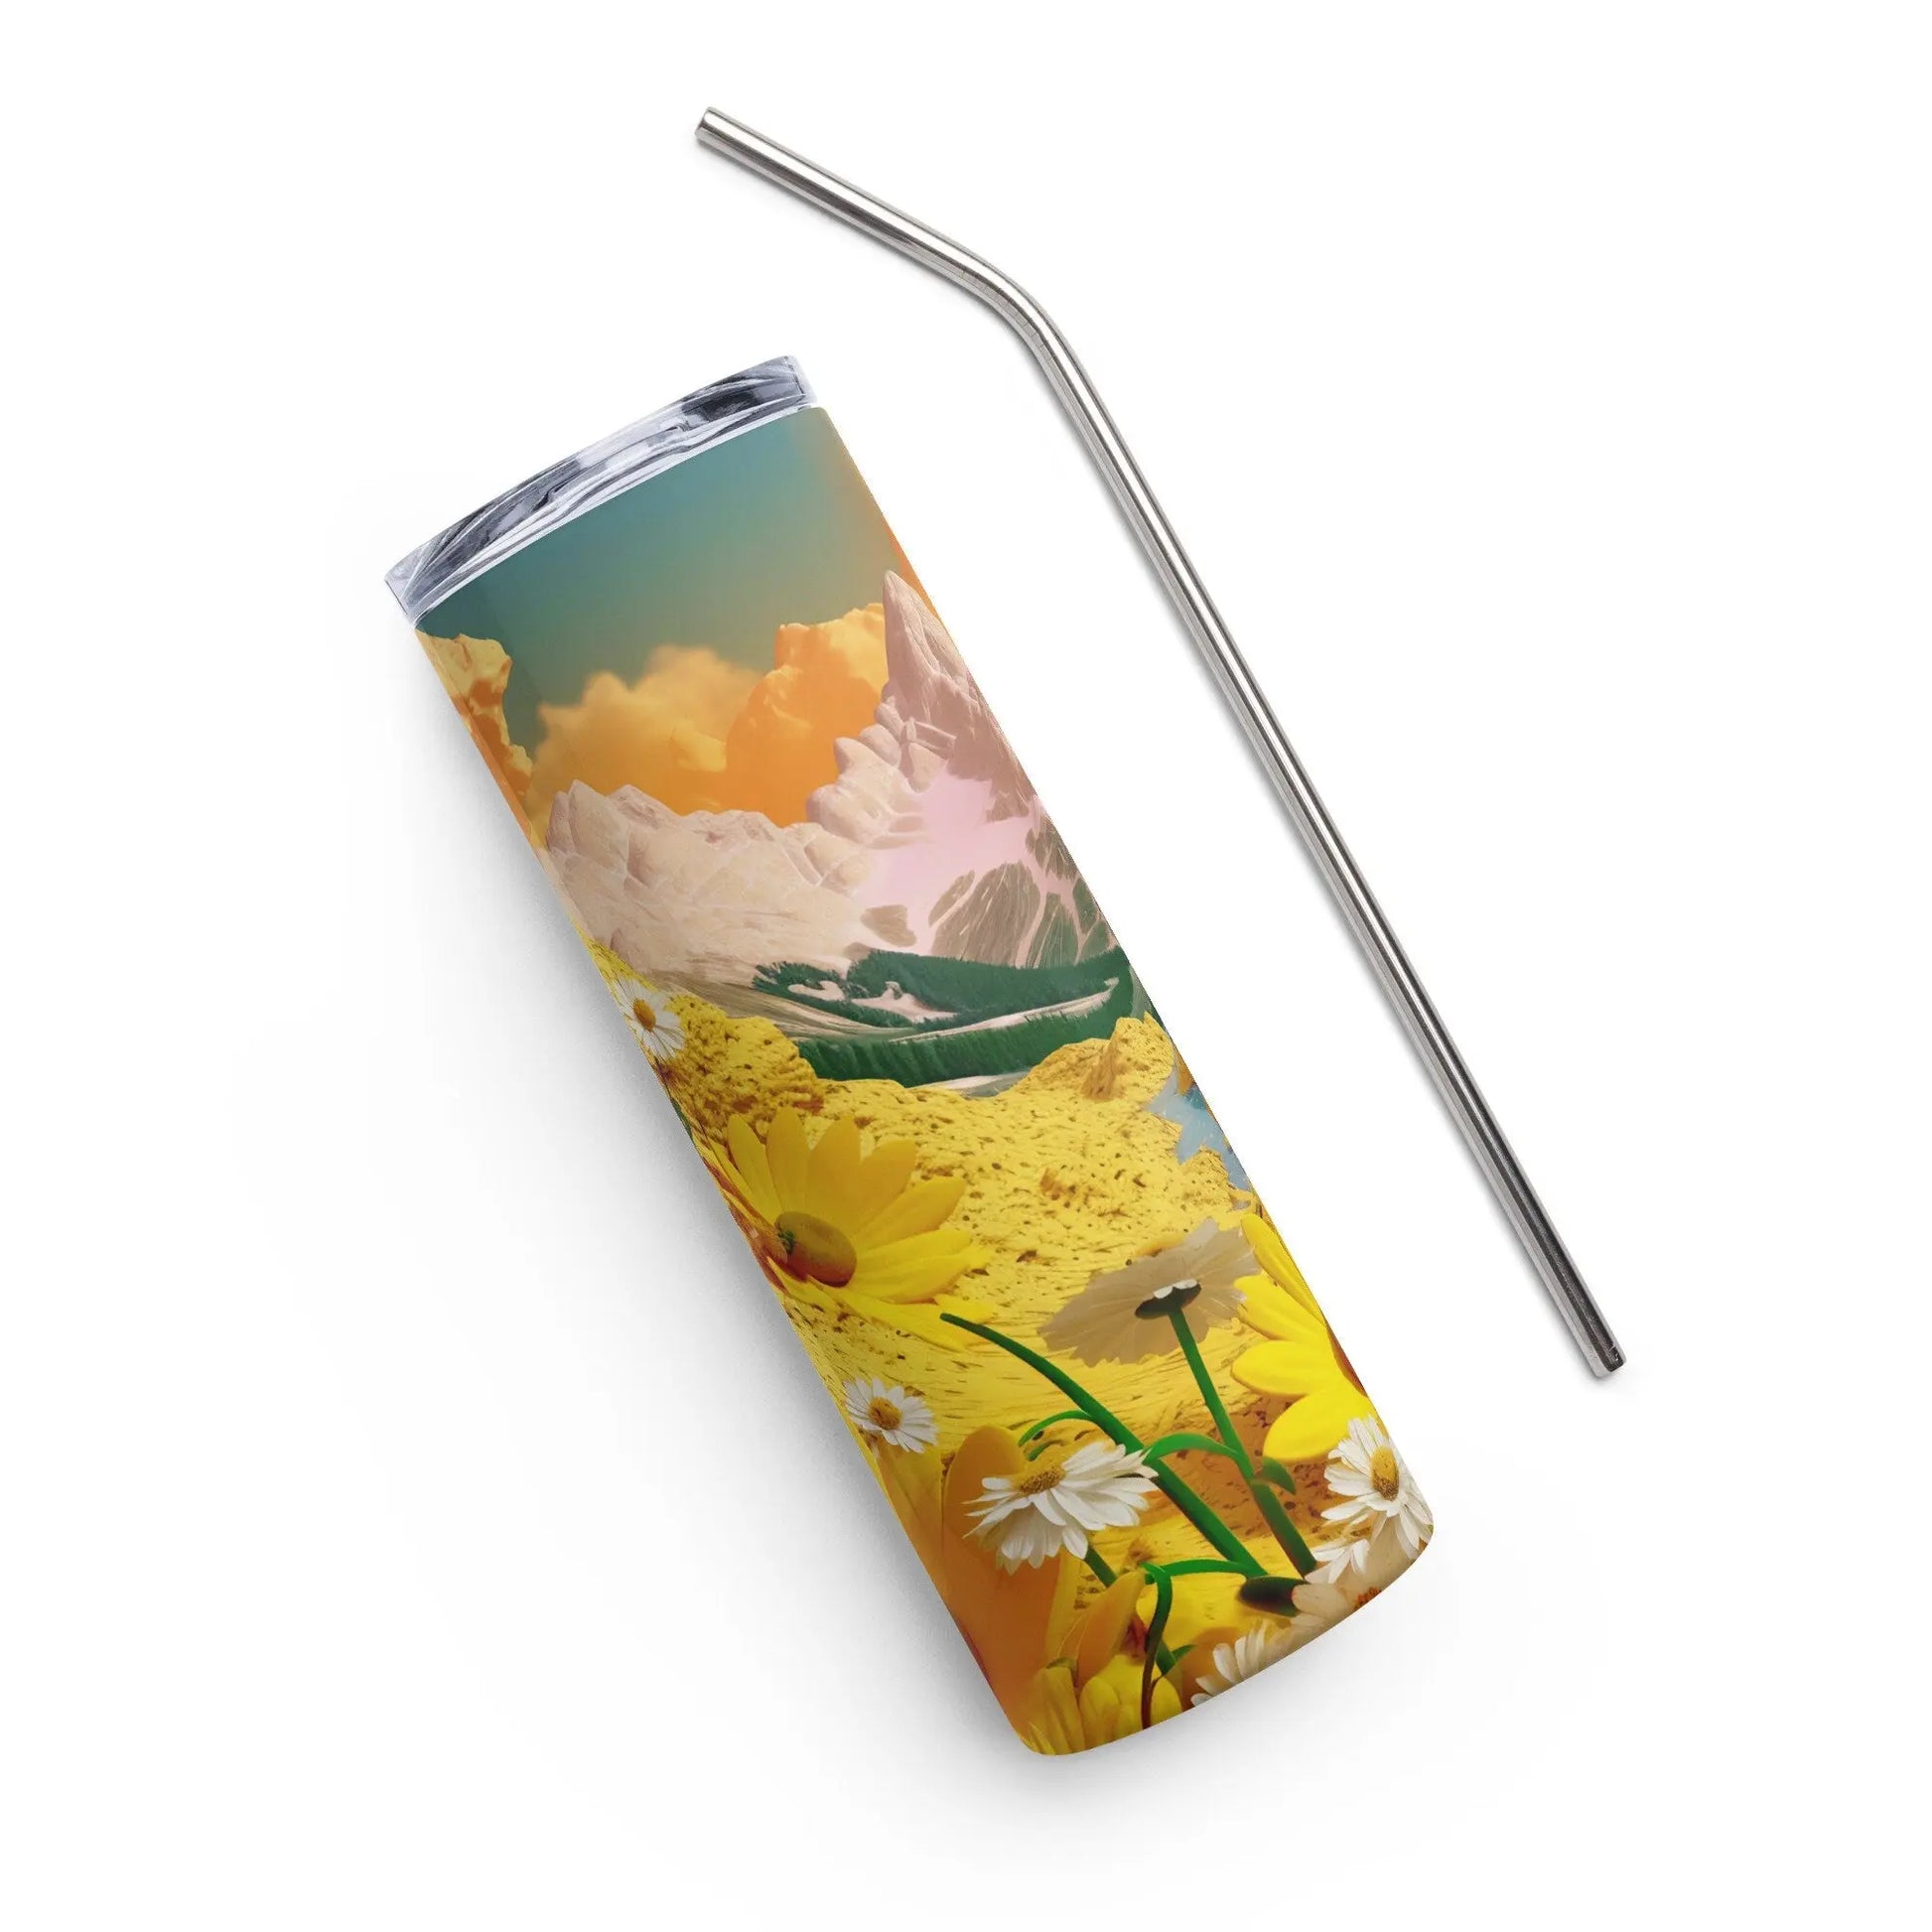 Personalized 3D Cute Embroidered Aesthetic White and Yellow Mountain Tumbler Yellow Daisies.